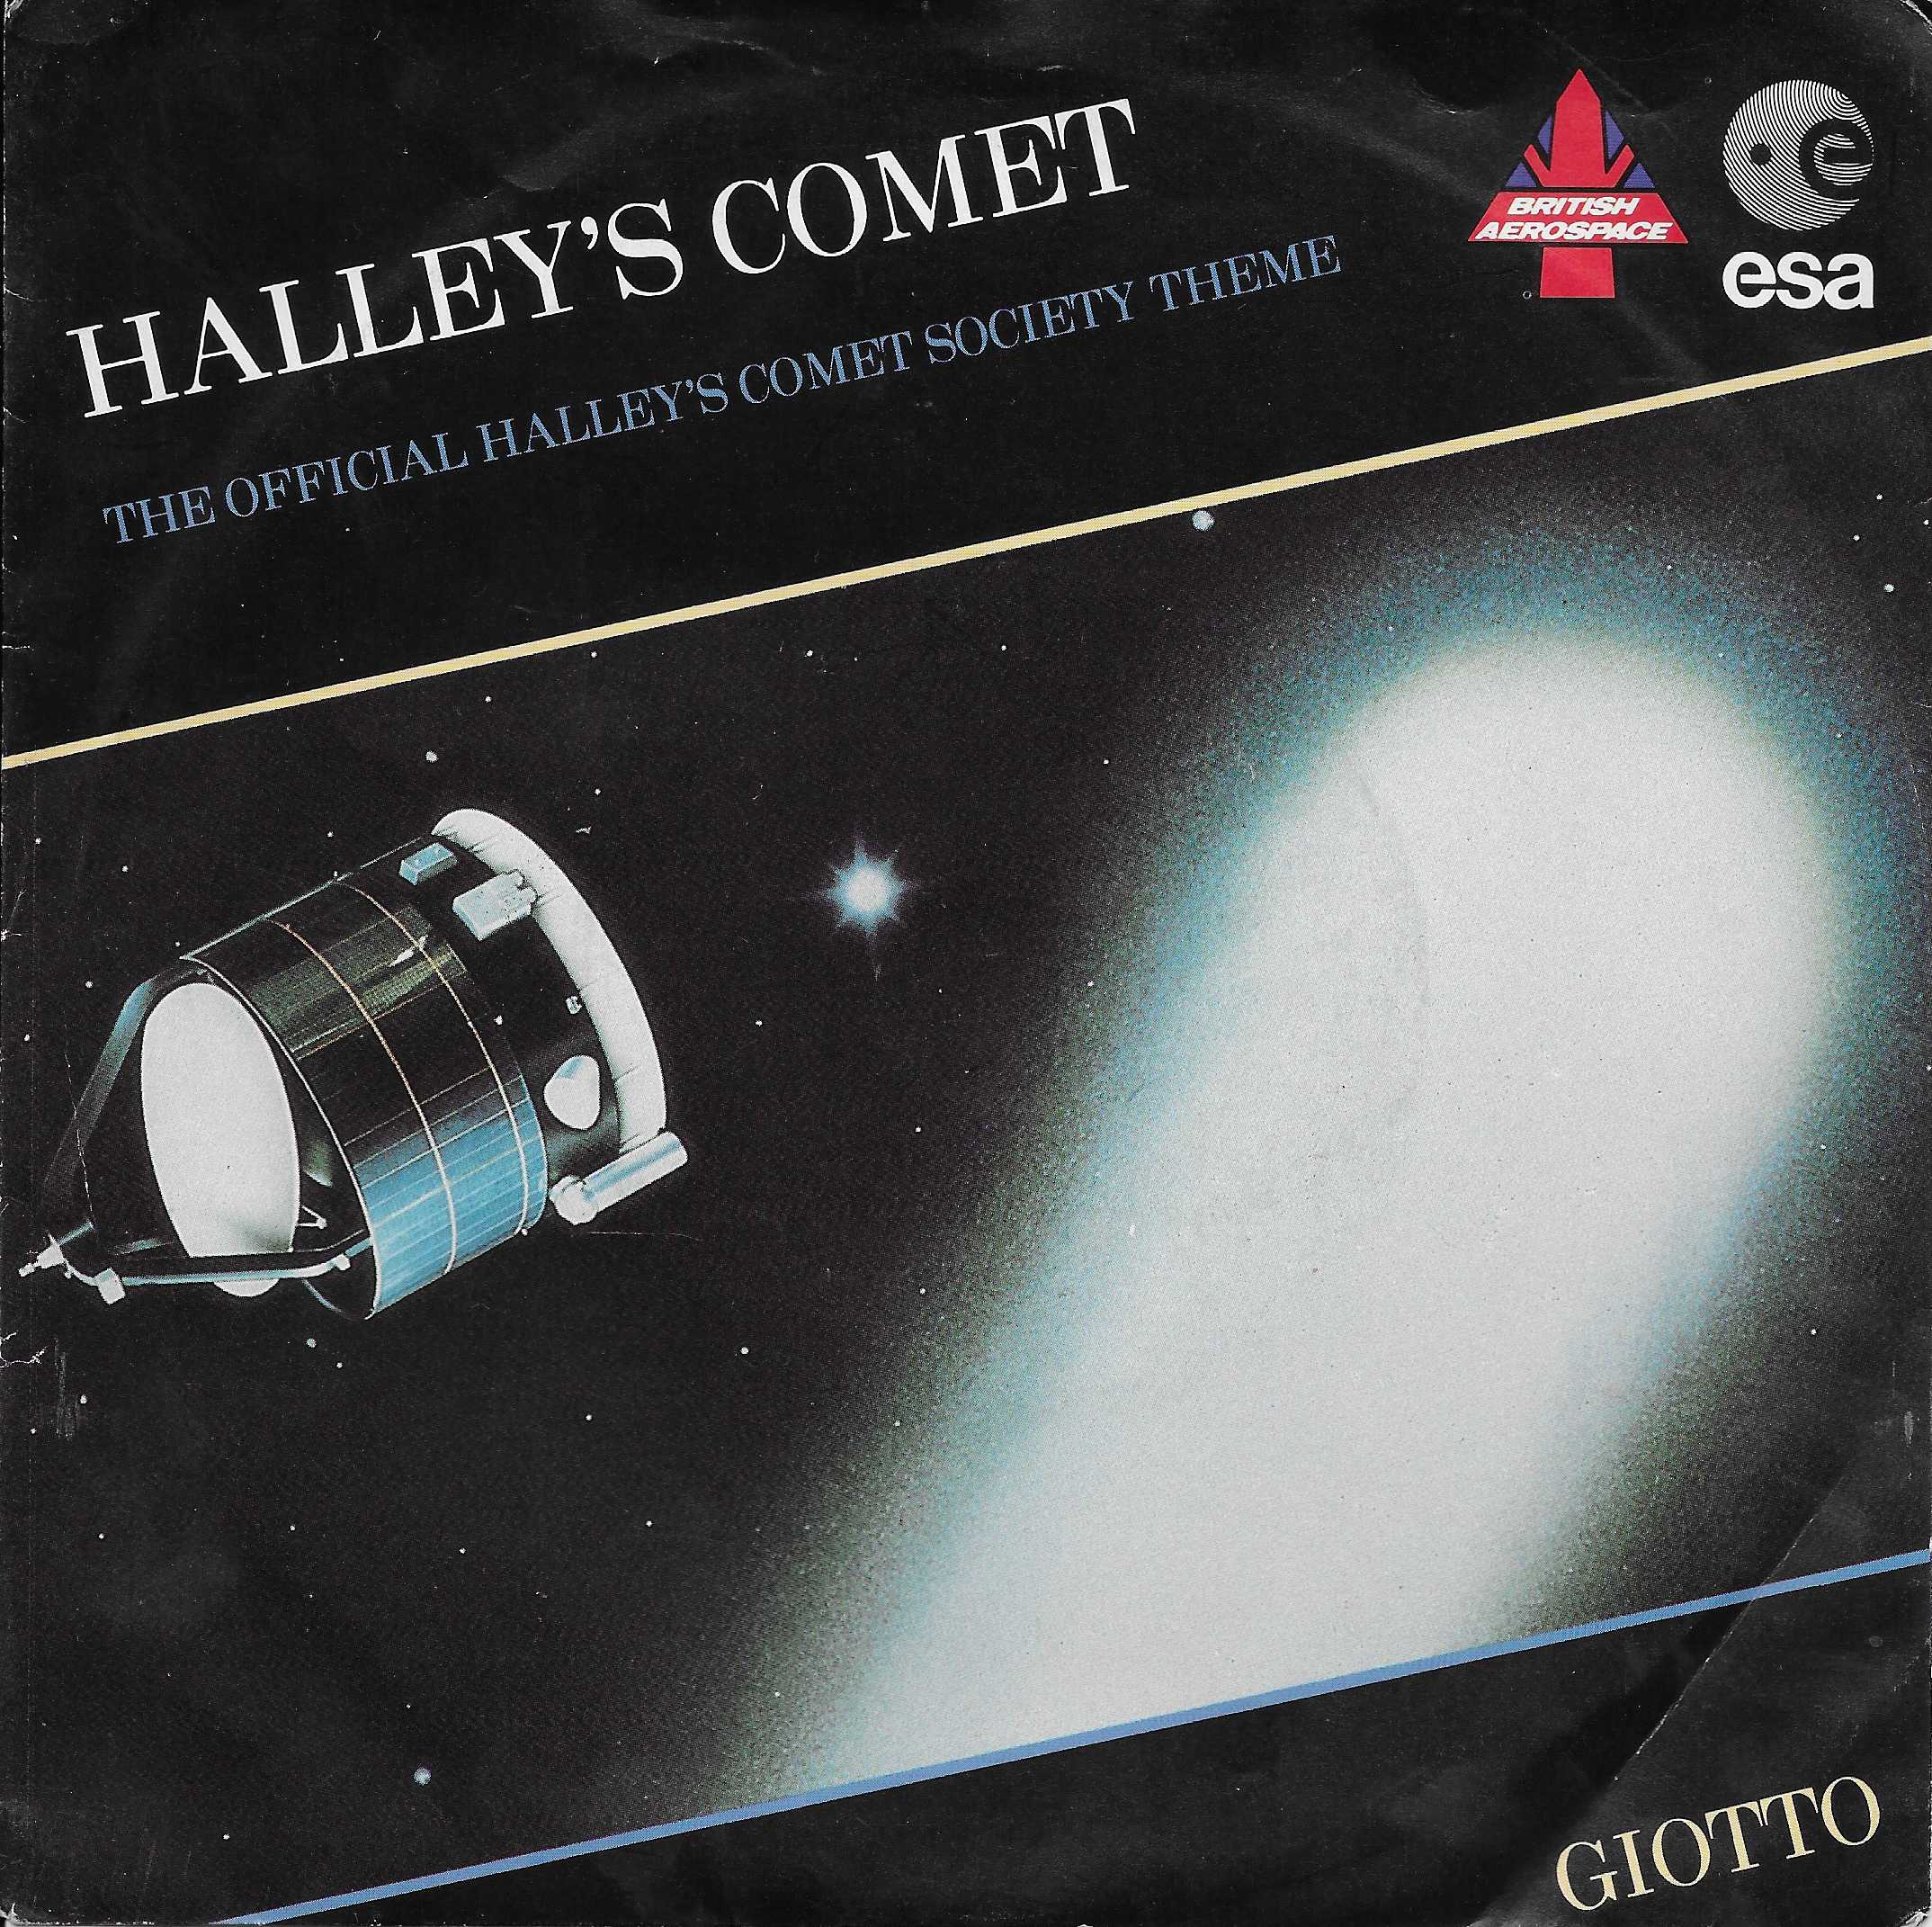 Picture of DB 9117 Halley's Comet by artist Paul Hart / Joe Campbell from the BBC records and Tapes library